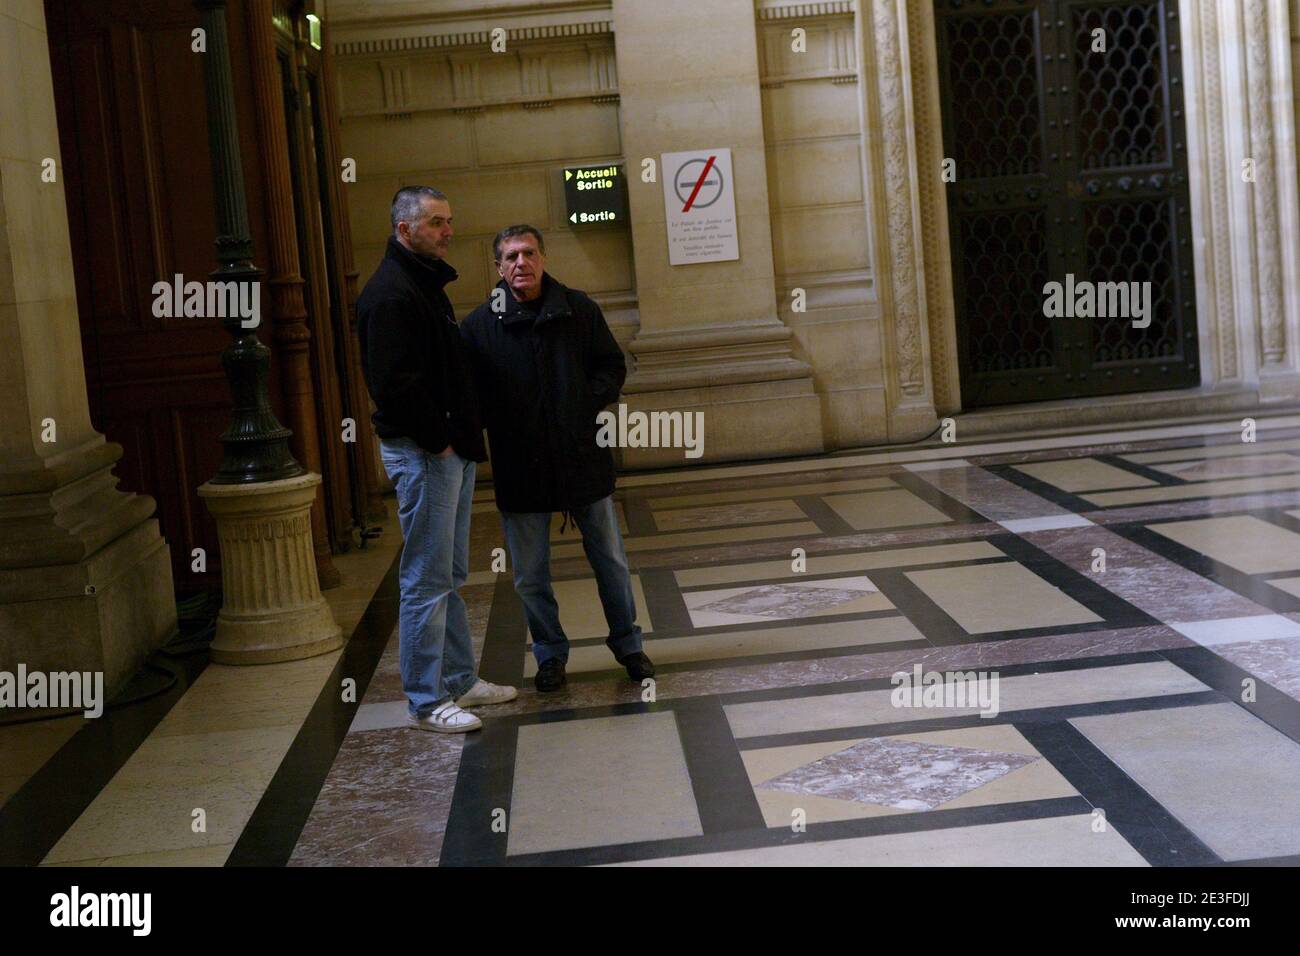 Stephane Colonna, brother of Yvan Colonna and Jean-Hugues Colonna father of Yvan Colonna at the Paris courthouse to attend the Yvan Colonna Trial, in Paris, France, on March 5, 2009. Photo by Mousse/ABACAPRESS.COM Stock Photo